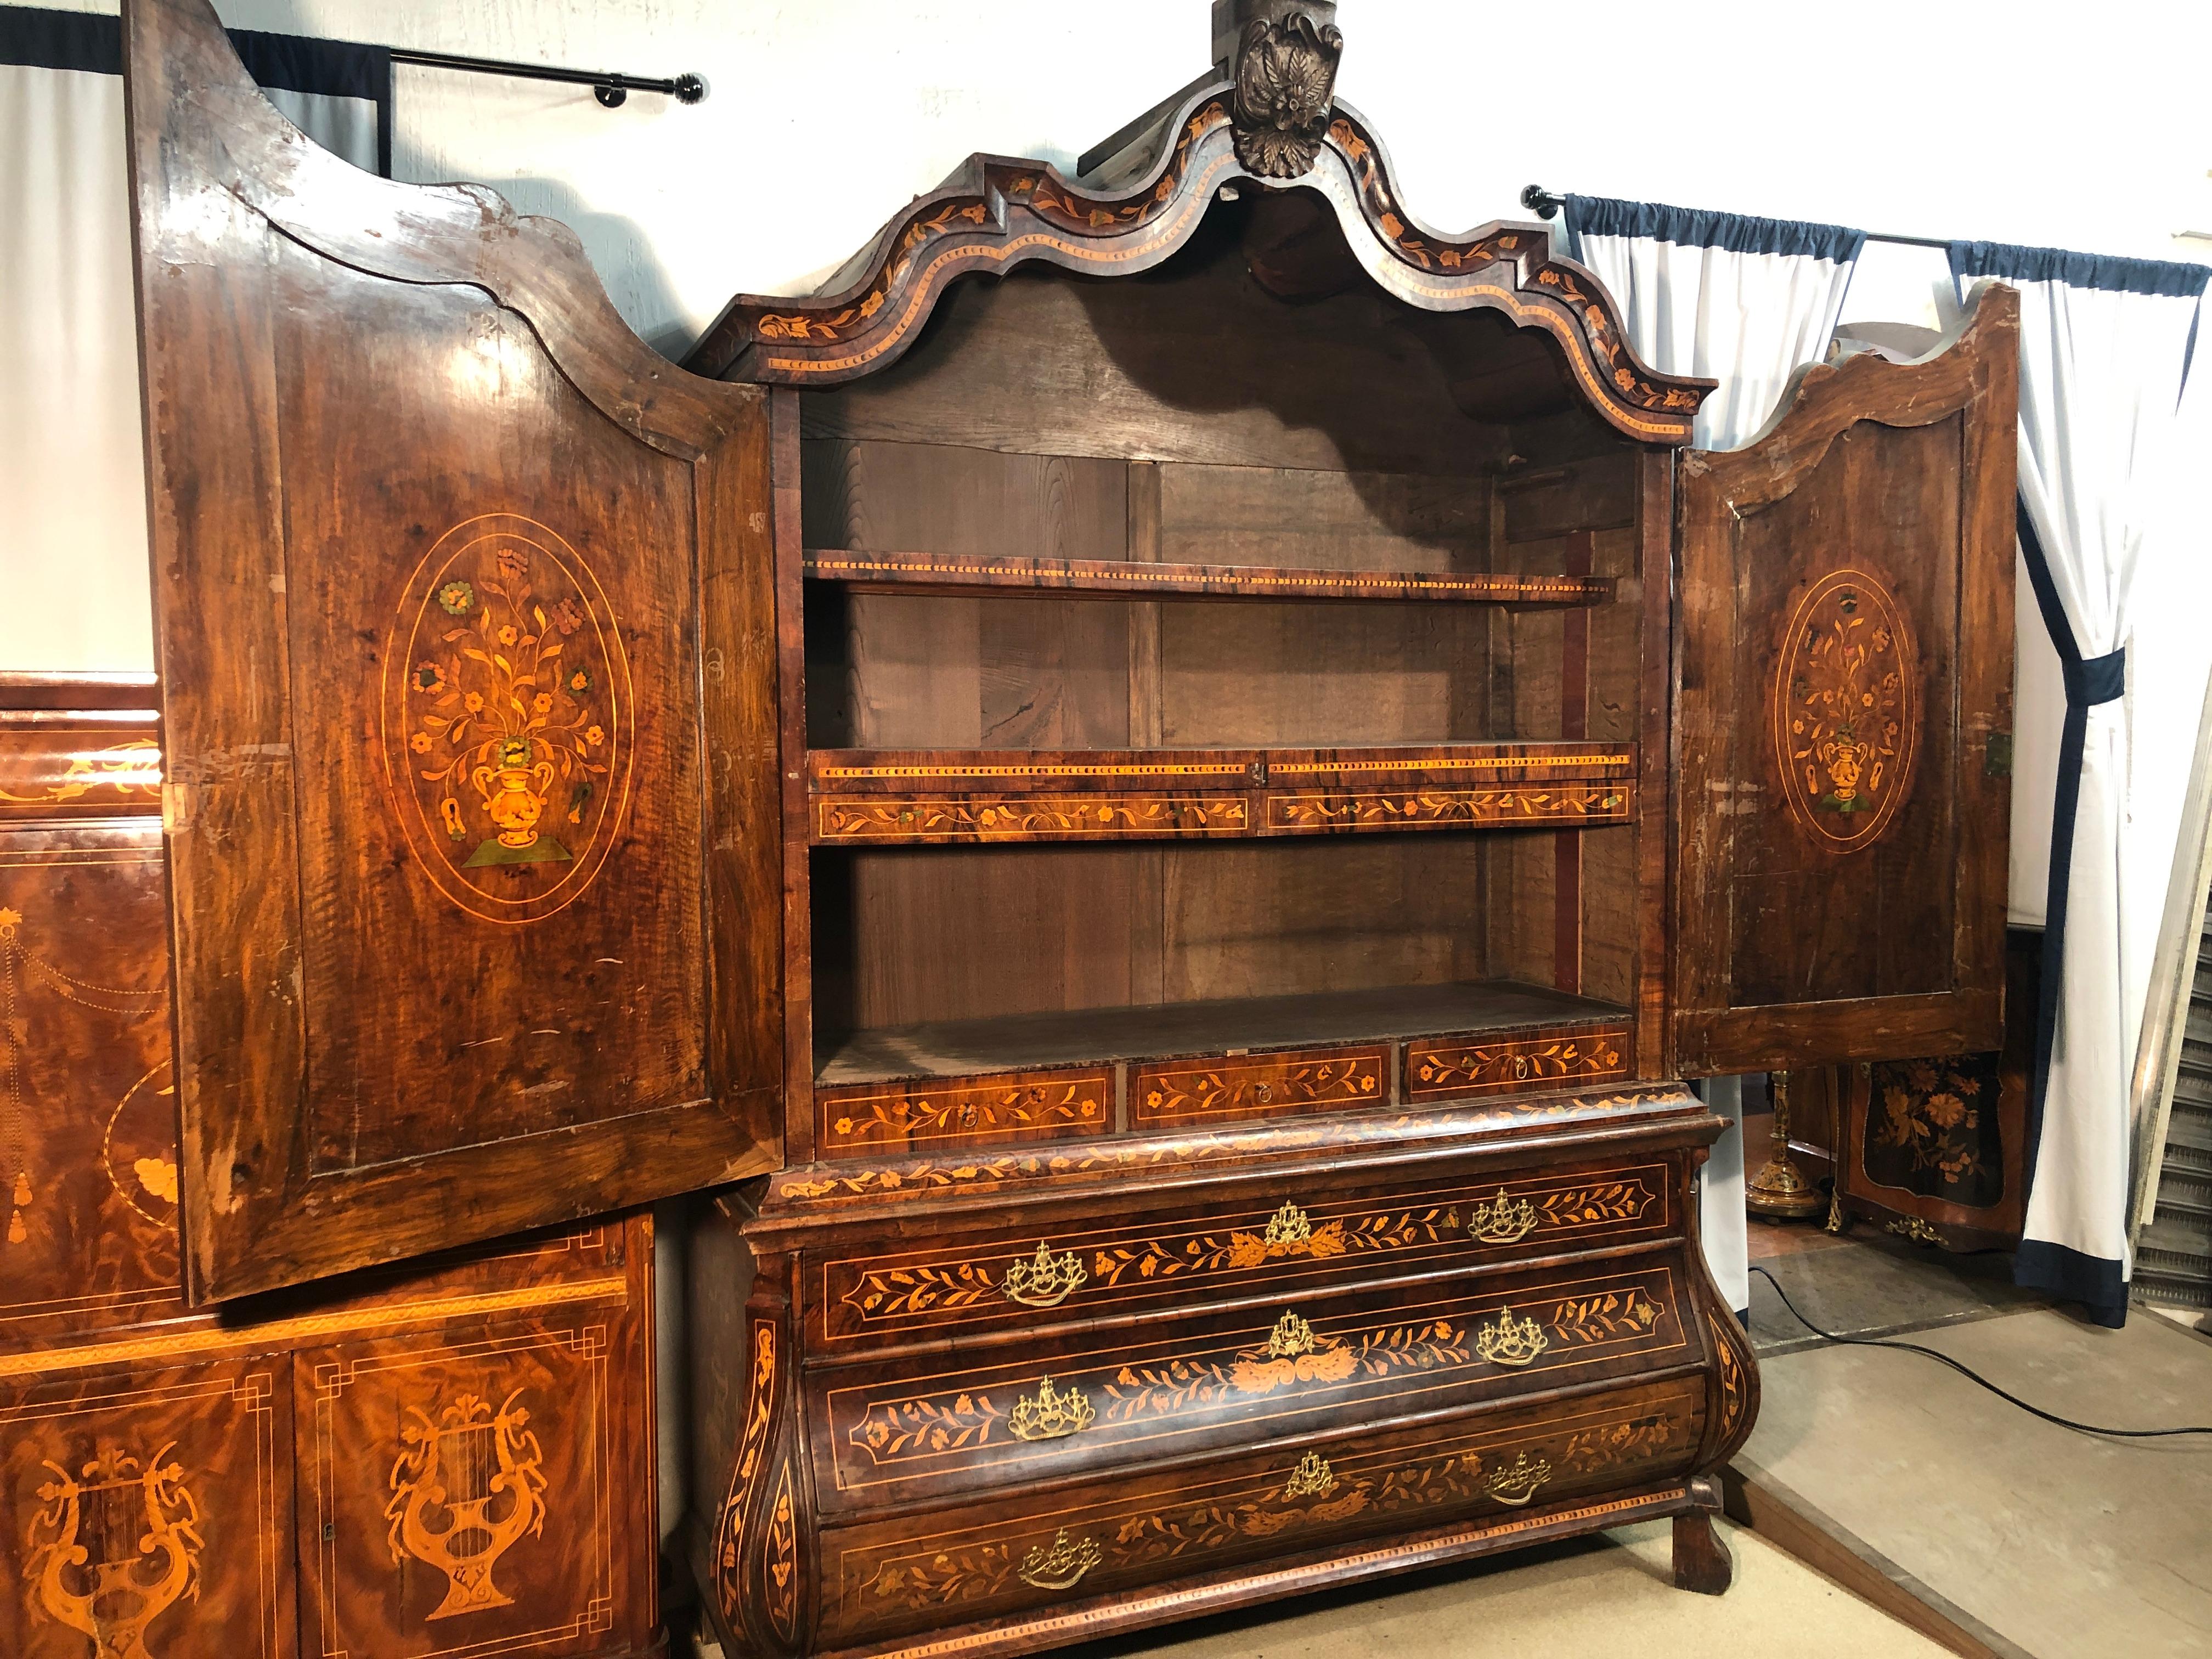 Dutch Armoires Trumeau in walnut root, early eight hundred, inlaid with floral motifs in fruit woods. Doors inlaid also inside, internal inlaid drawers, in good condition, to be restored. Small shortcomings and small cracks.
The upper cimasa was